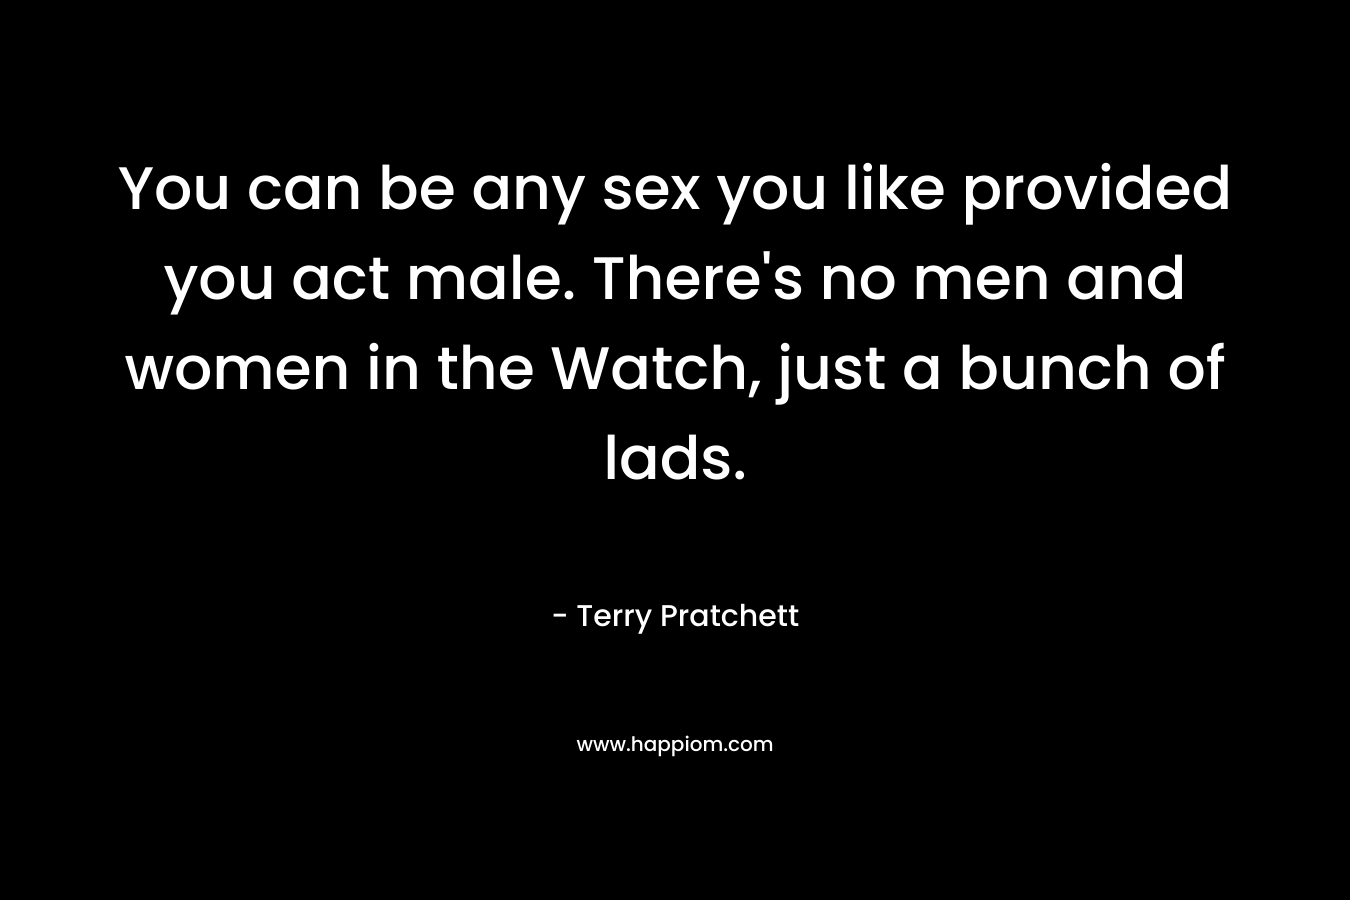 You can be any sex you like provided you act male. There's no men and women in the Watch, just a bunch of lads.